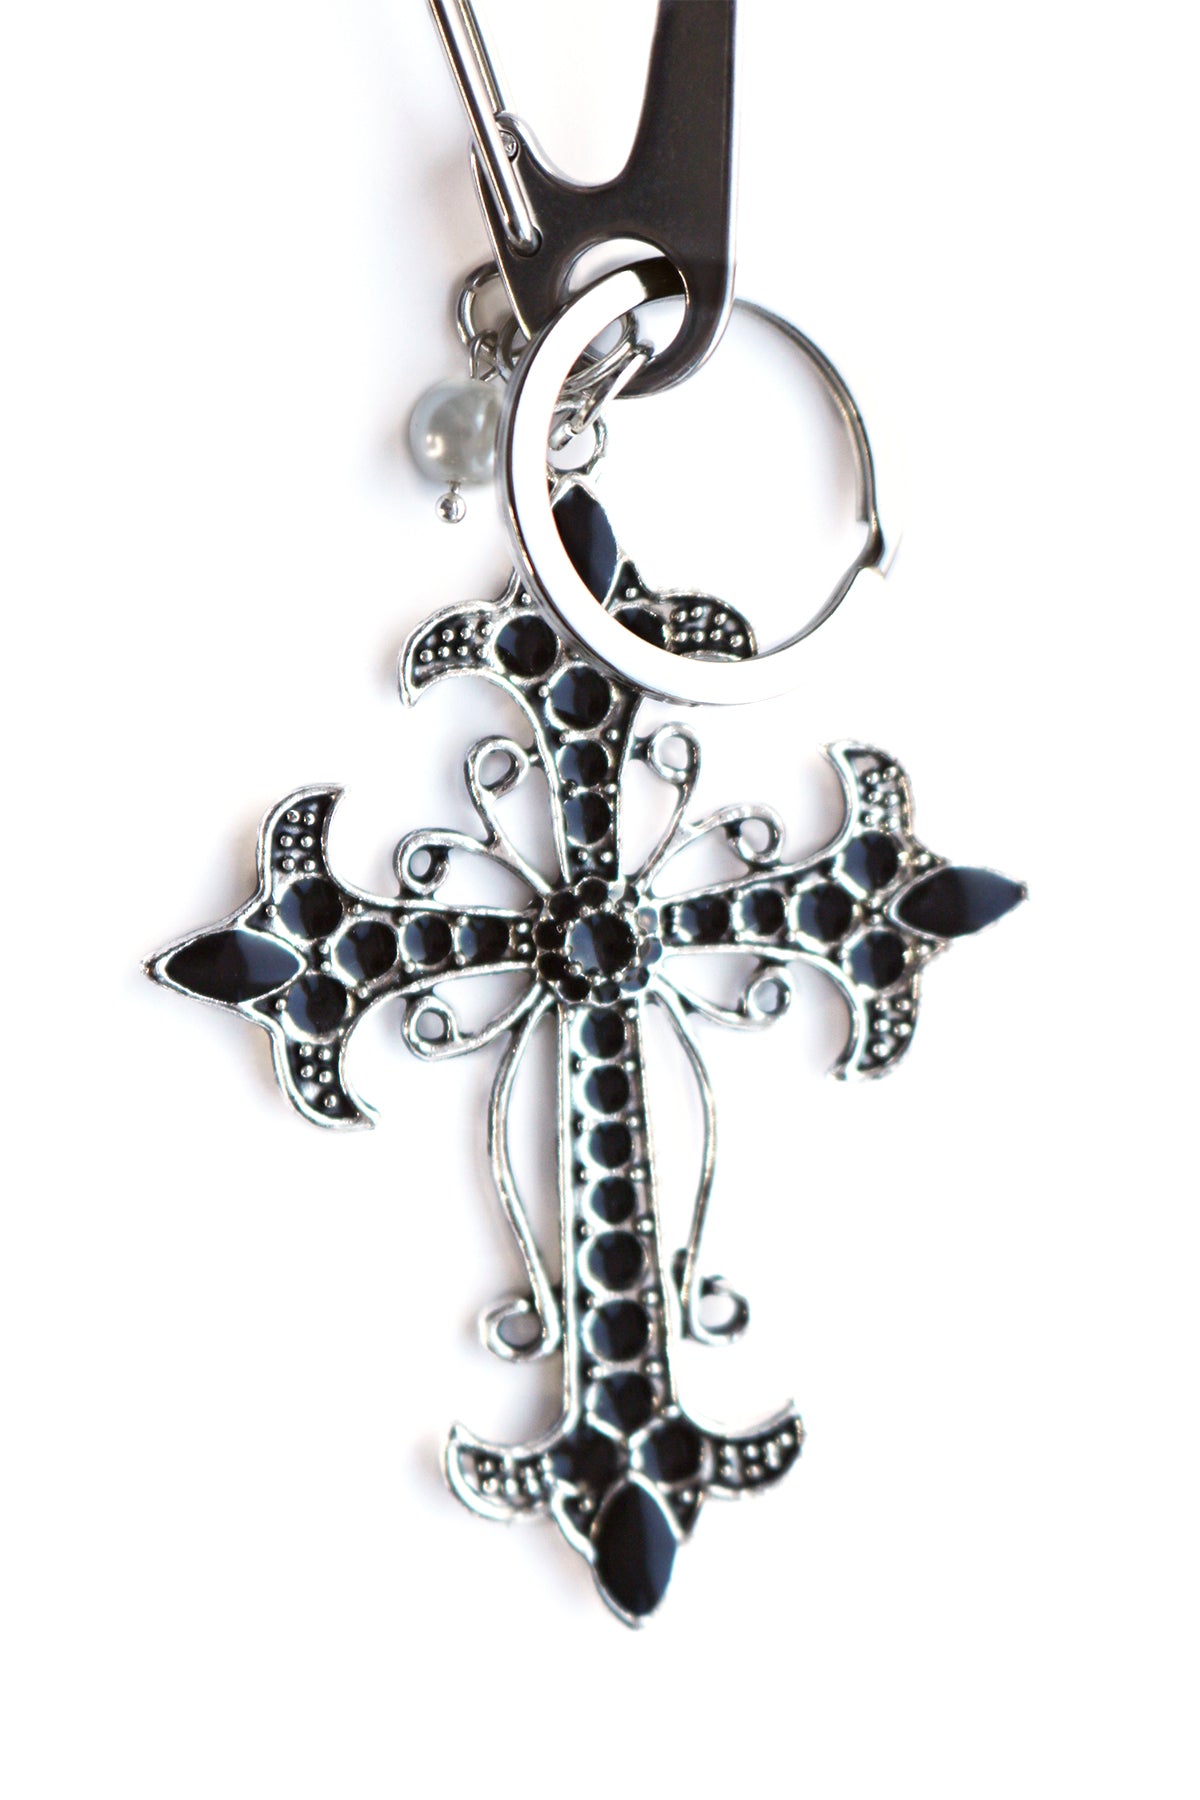 LARGE BLACK:SILVER CROSS PENDENT KEYCHAIN